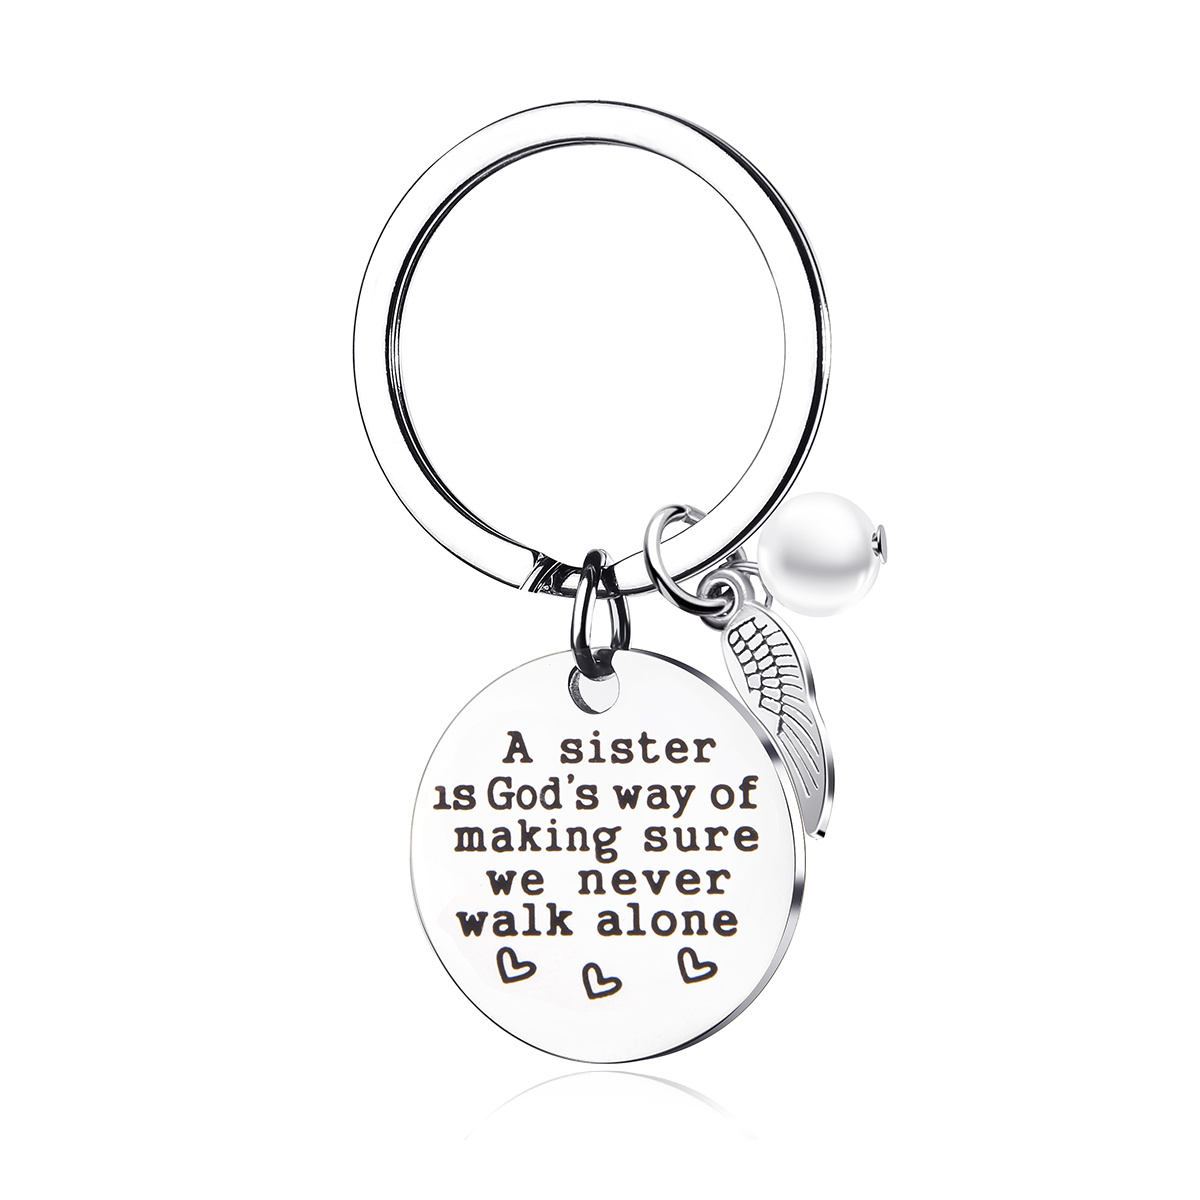 Sliner 12 Pcs Friend Gifts Friendship Travel Tumbles and Inspirational  Keychains Best Friend Christm…See more Sliner 12 Pcs Friend Gifts  Friendship